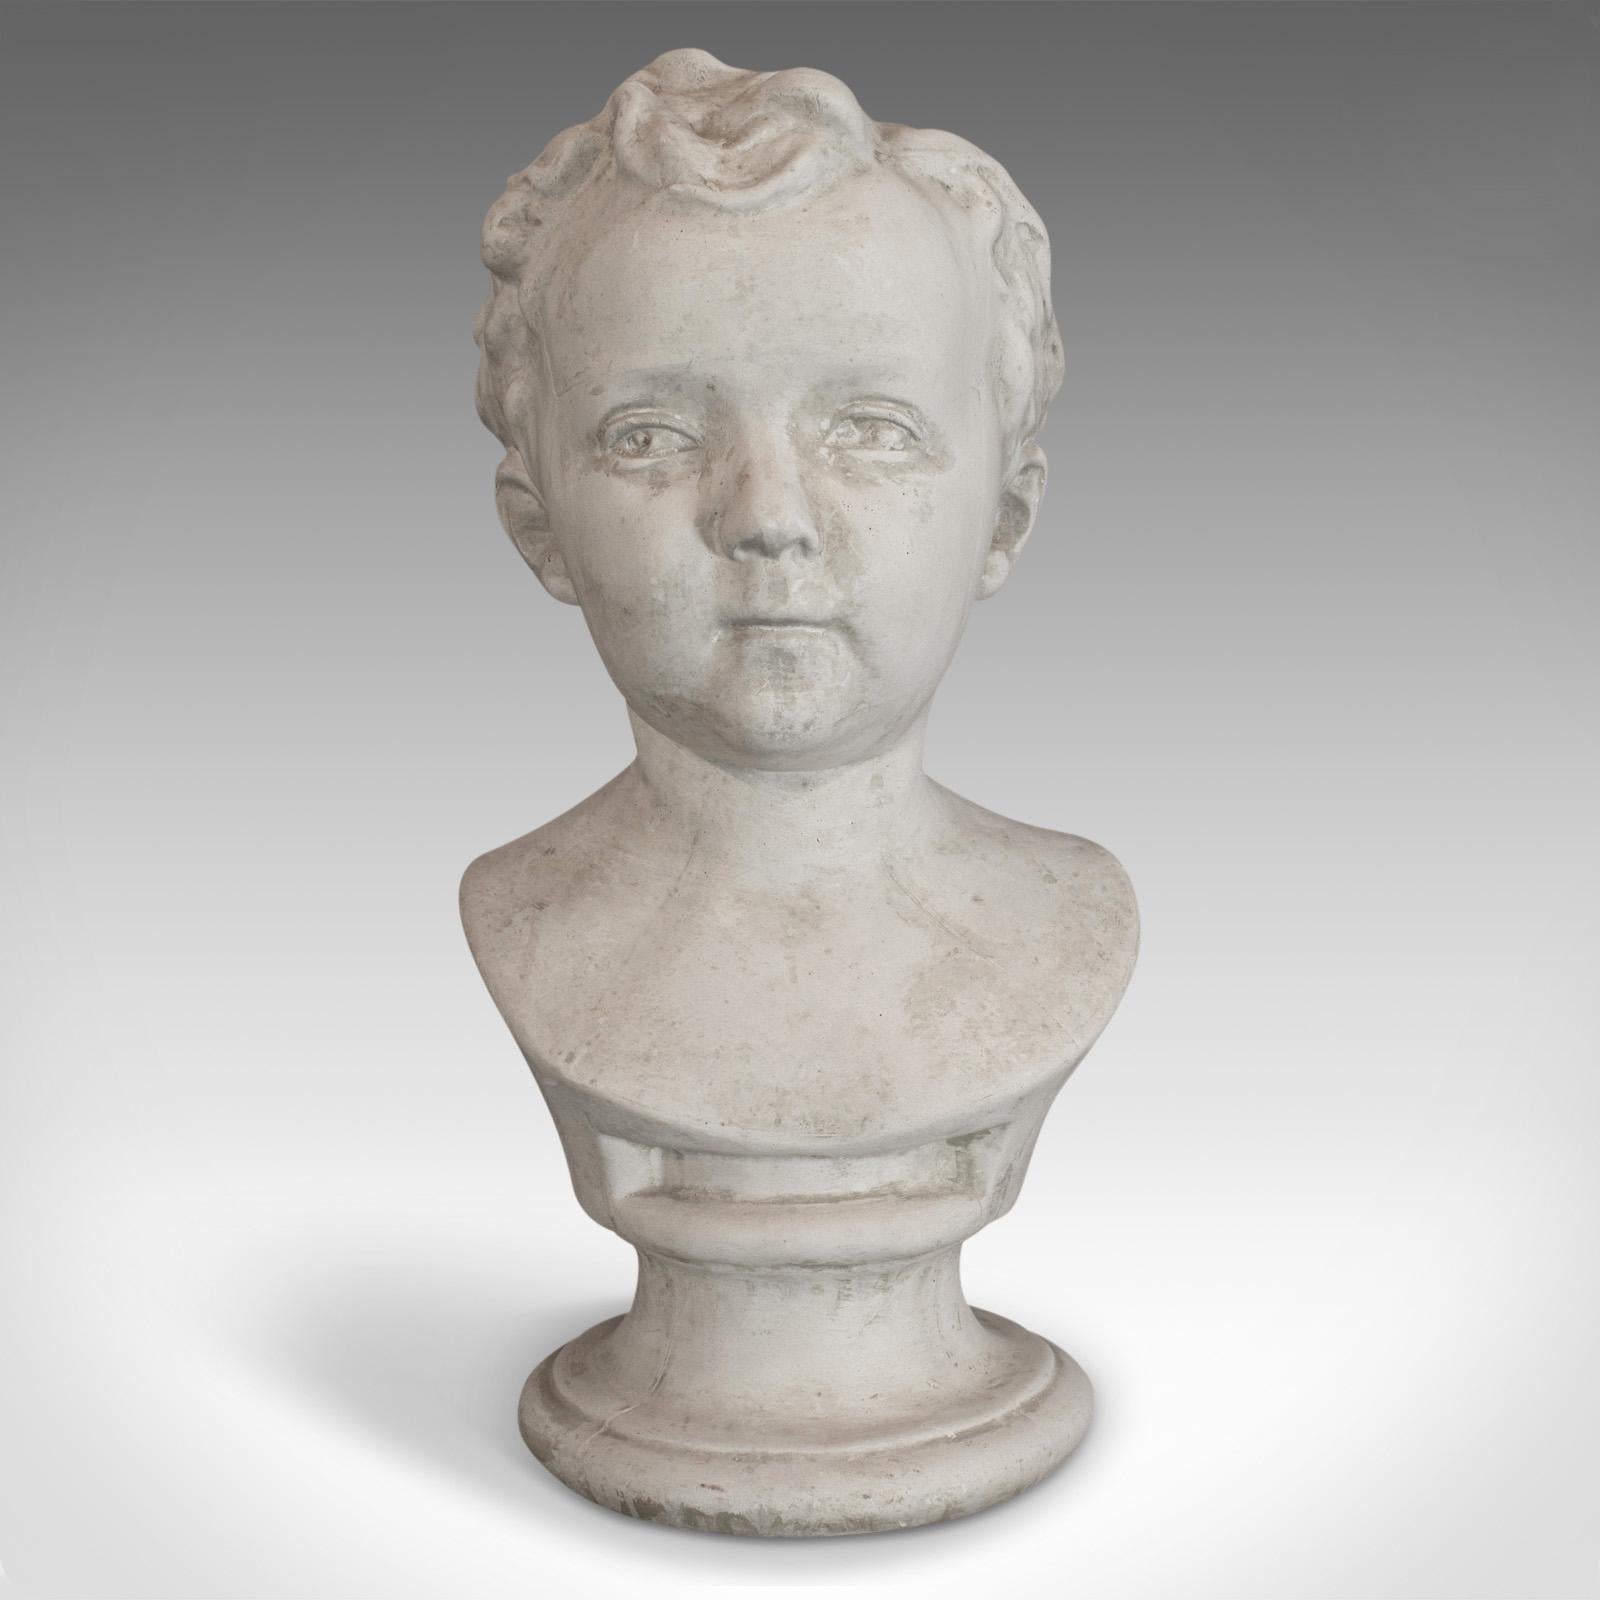 This is a vintage child portrait bust. An English, plaster cast study of a young boy and dating to the late 20th century.

Full of character and charm
Displays a desirable aged patina
Impish look captures the essence of a mischievous child
Wavy